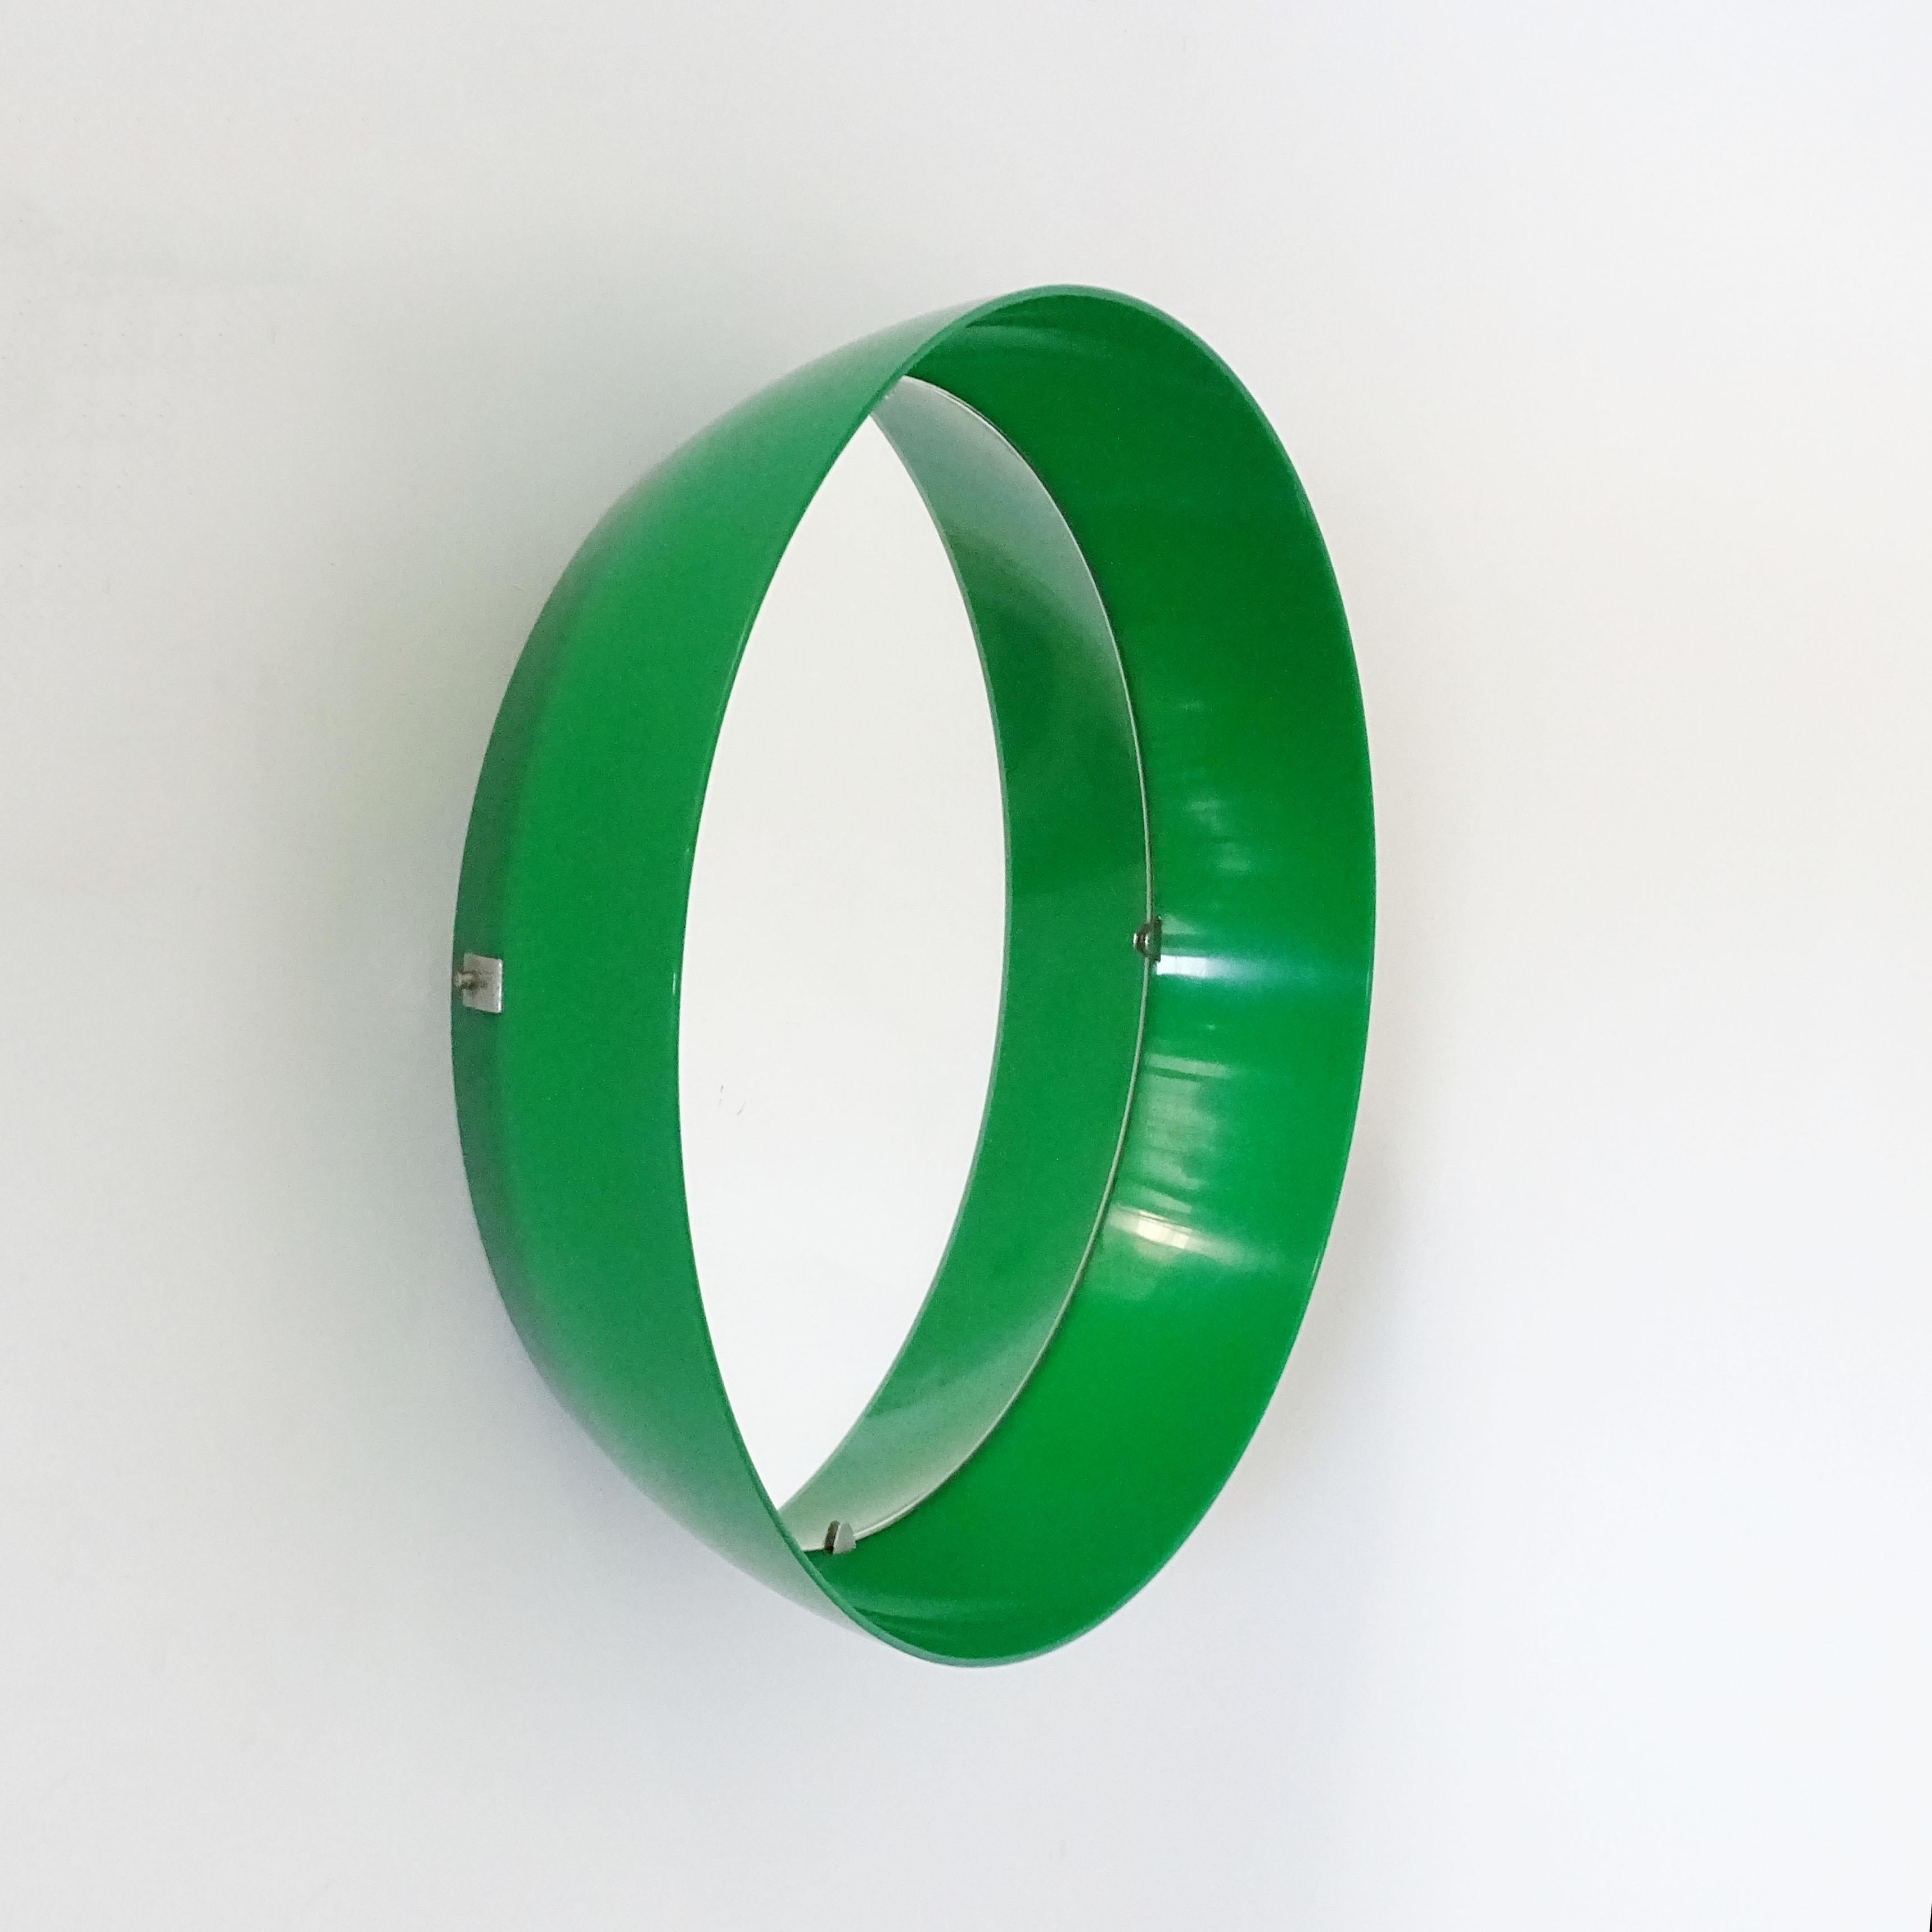 Early Kartell Green Plastic Pop Art Mirror, Italy, 1960s In Good Condition For Sale In Milan, IT